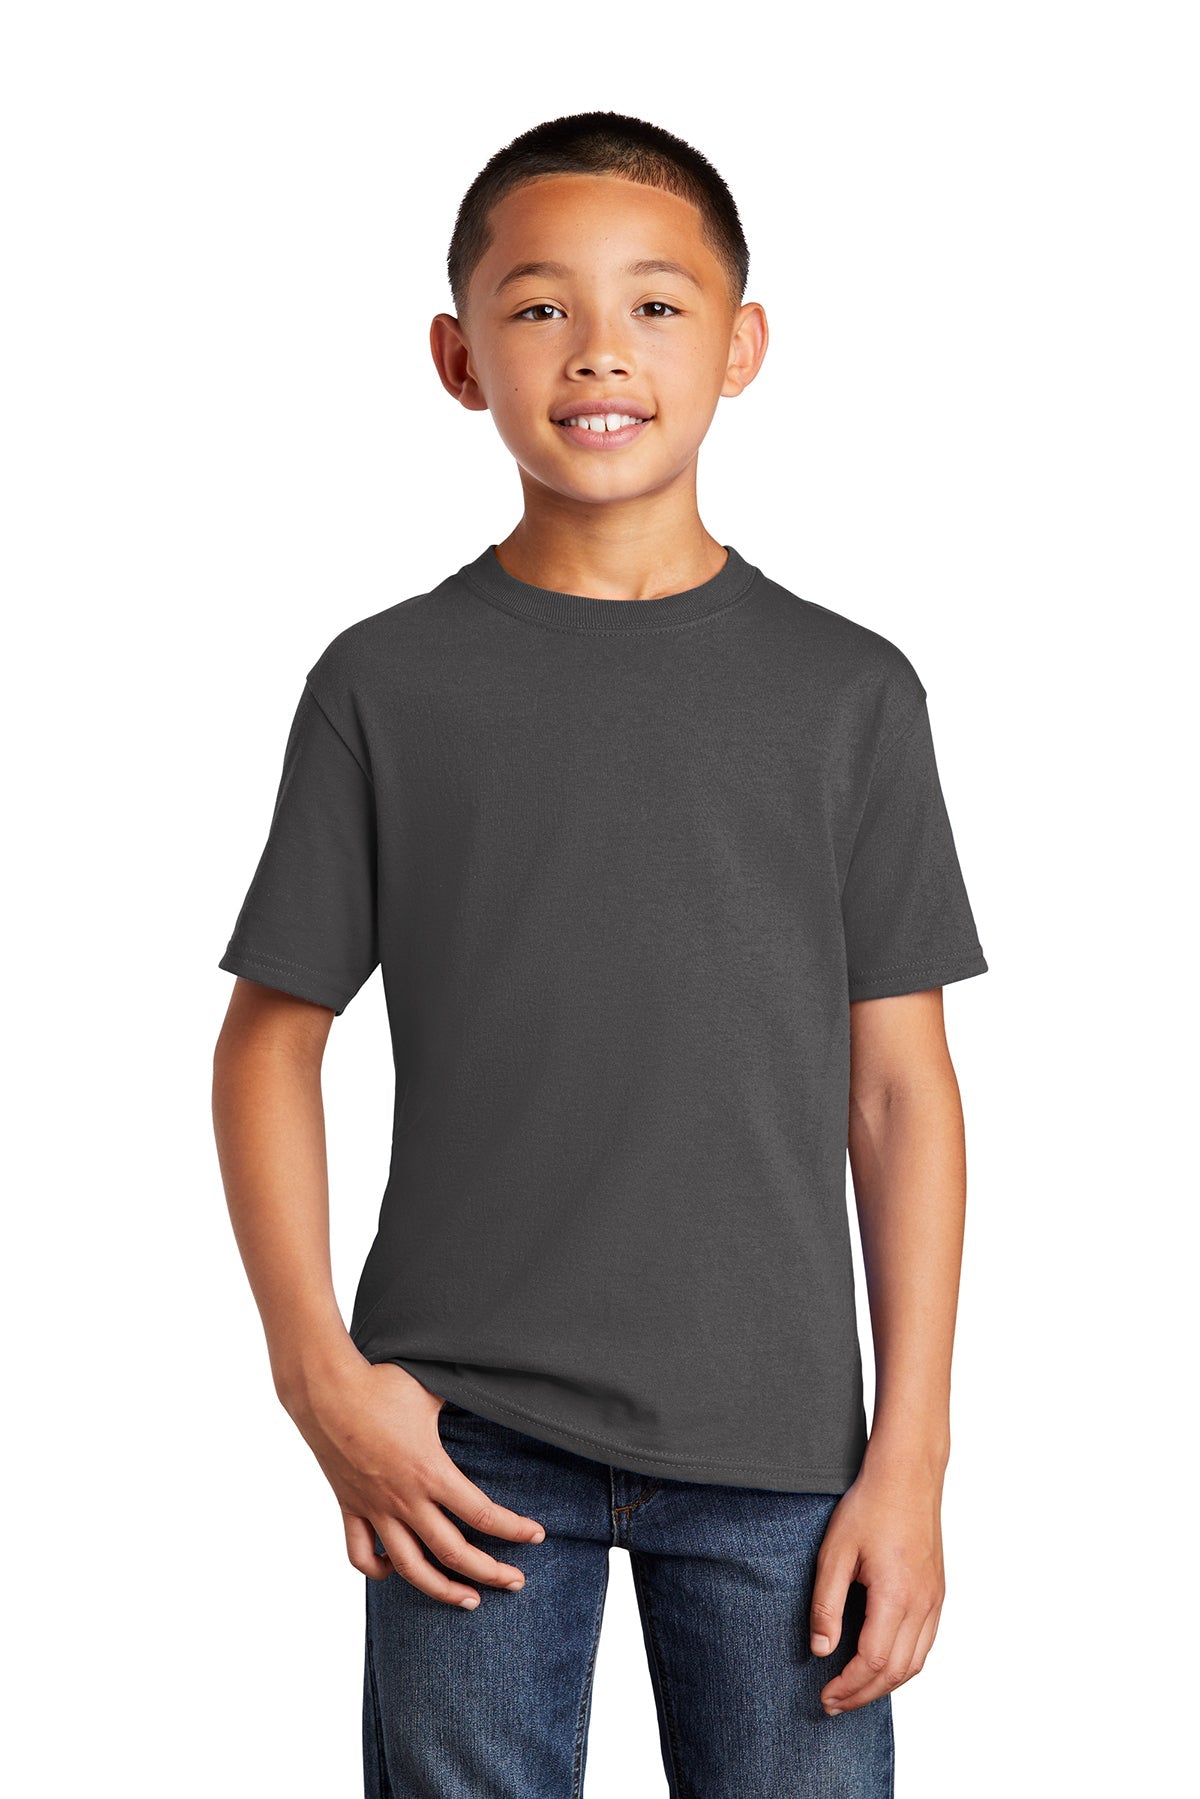 PC54Y Port & Company® Youth Core Cotton Tee. XS-XL